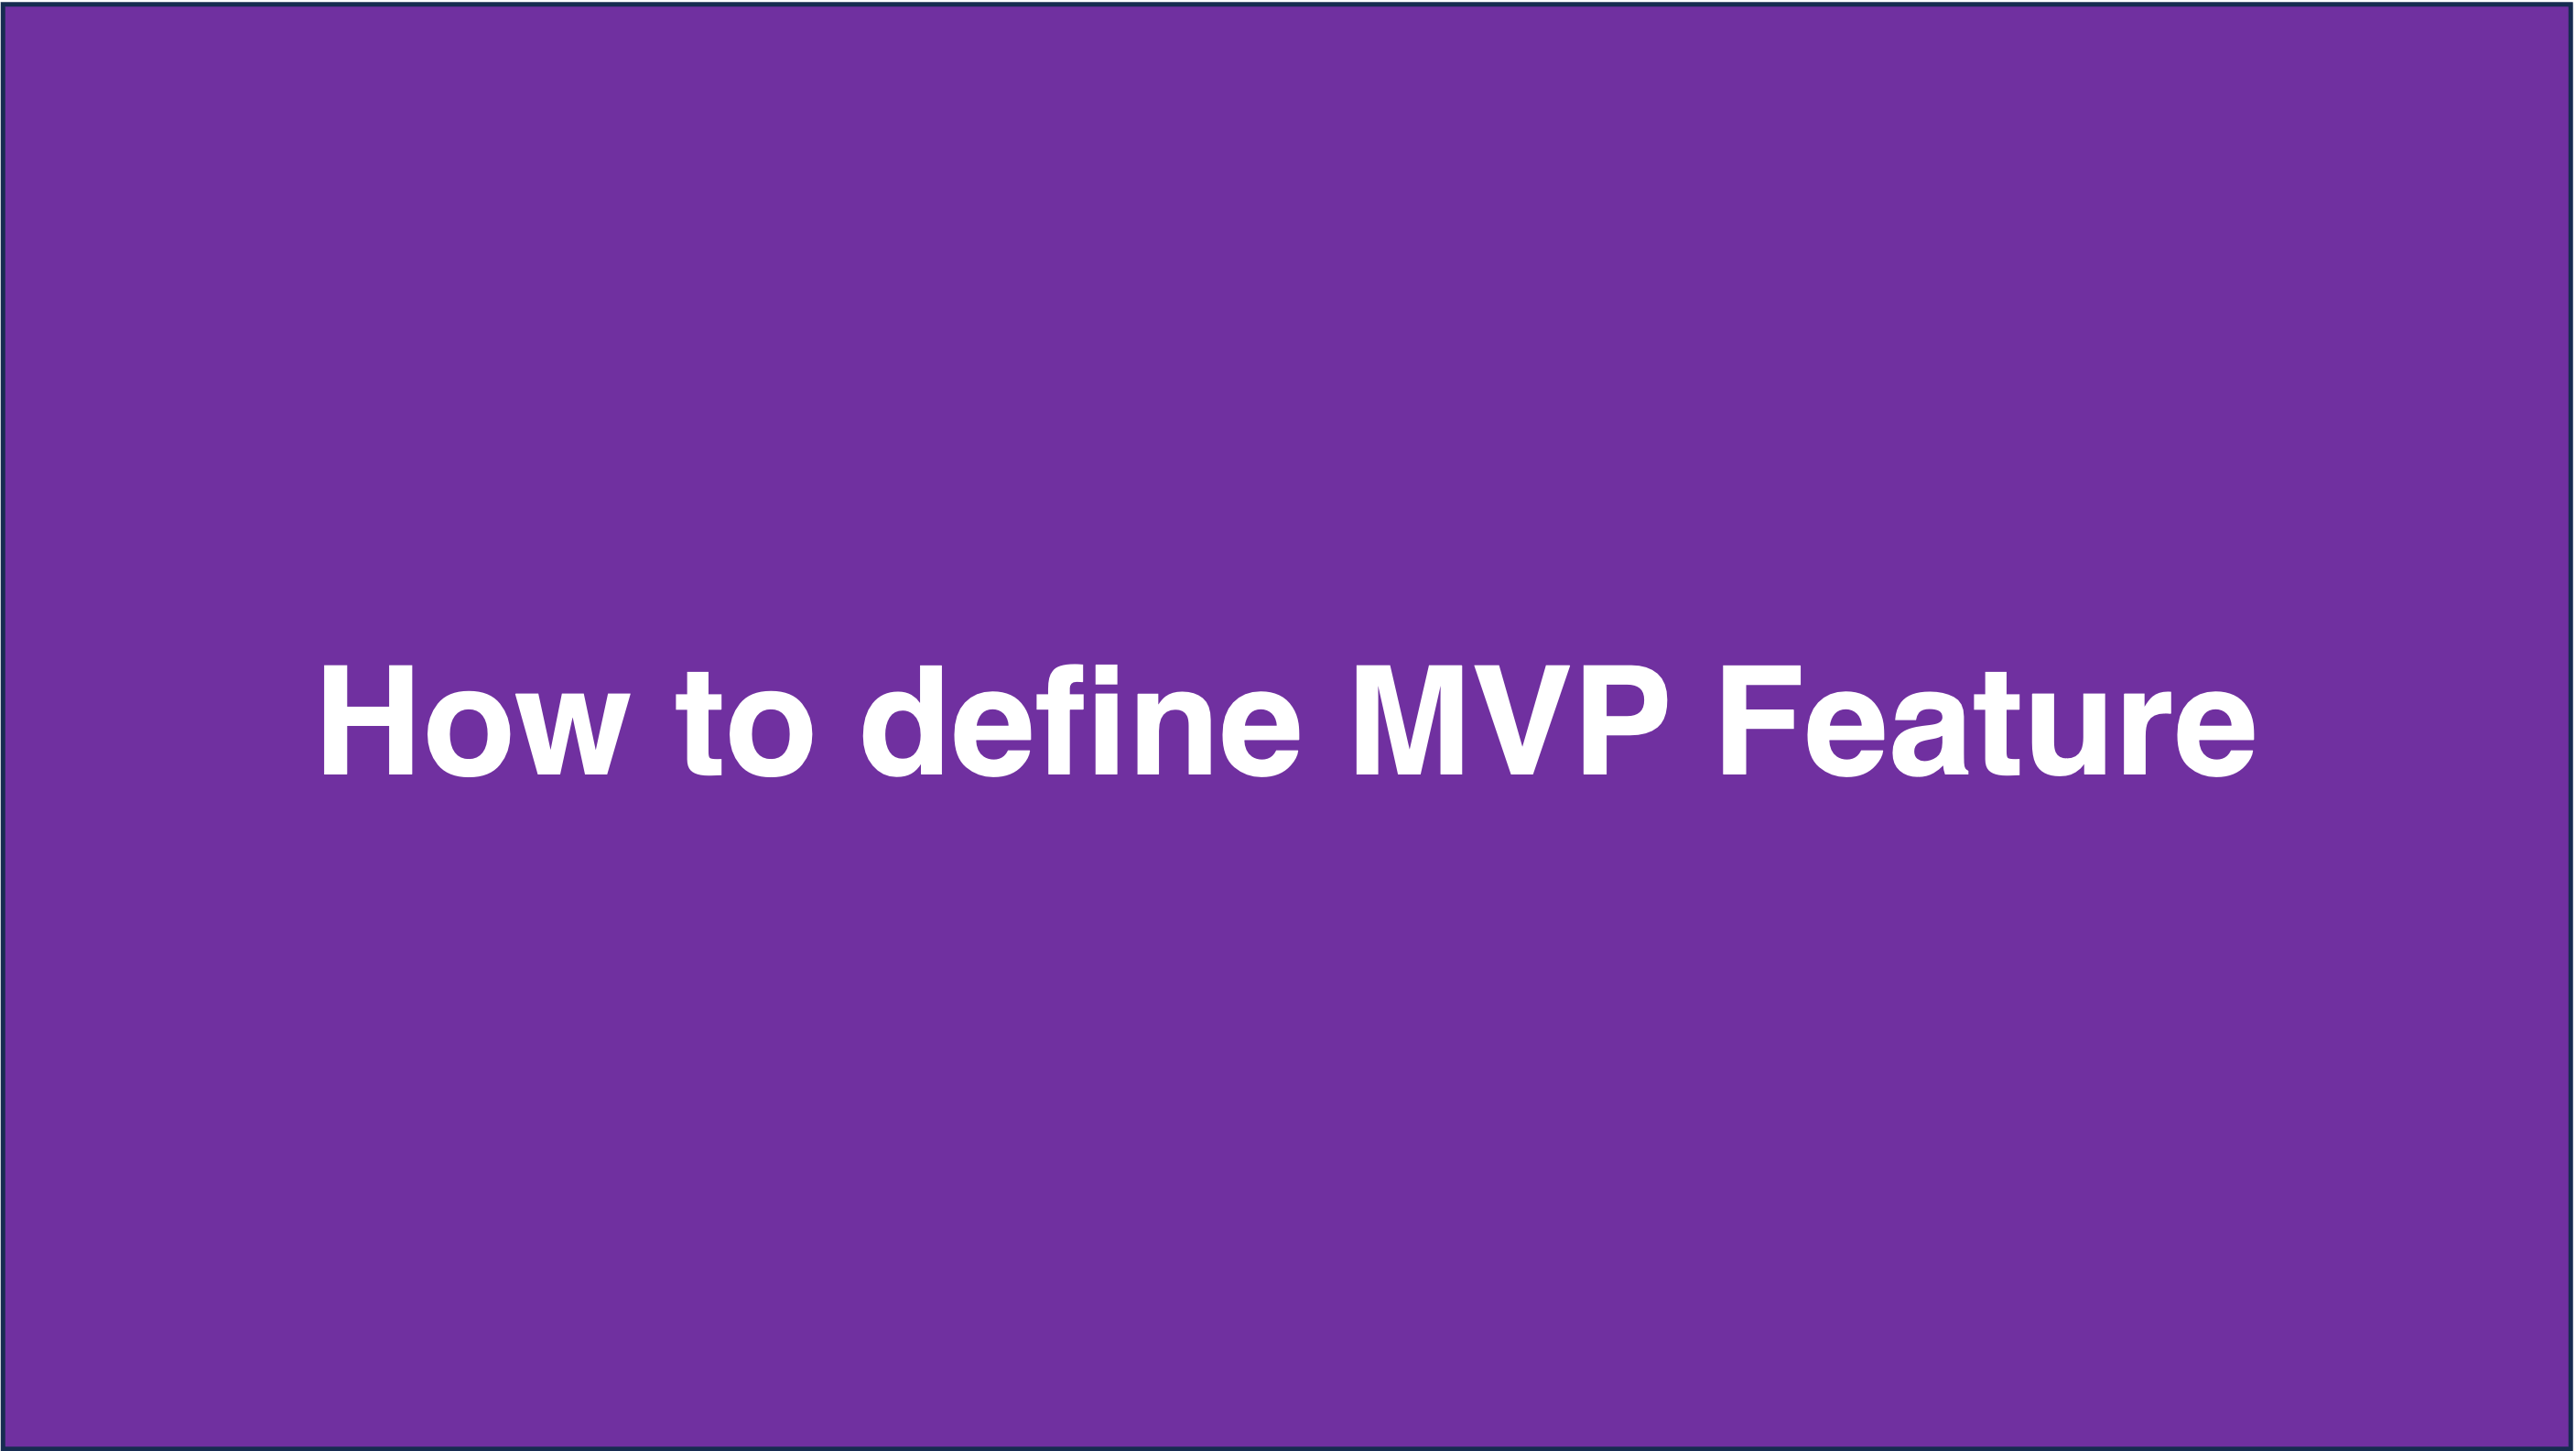 You can save 90% of cost with well defined MVP